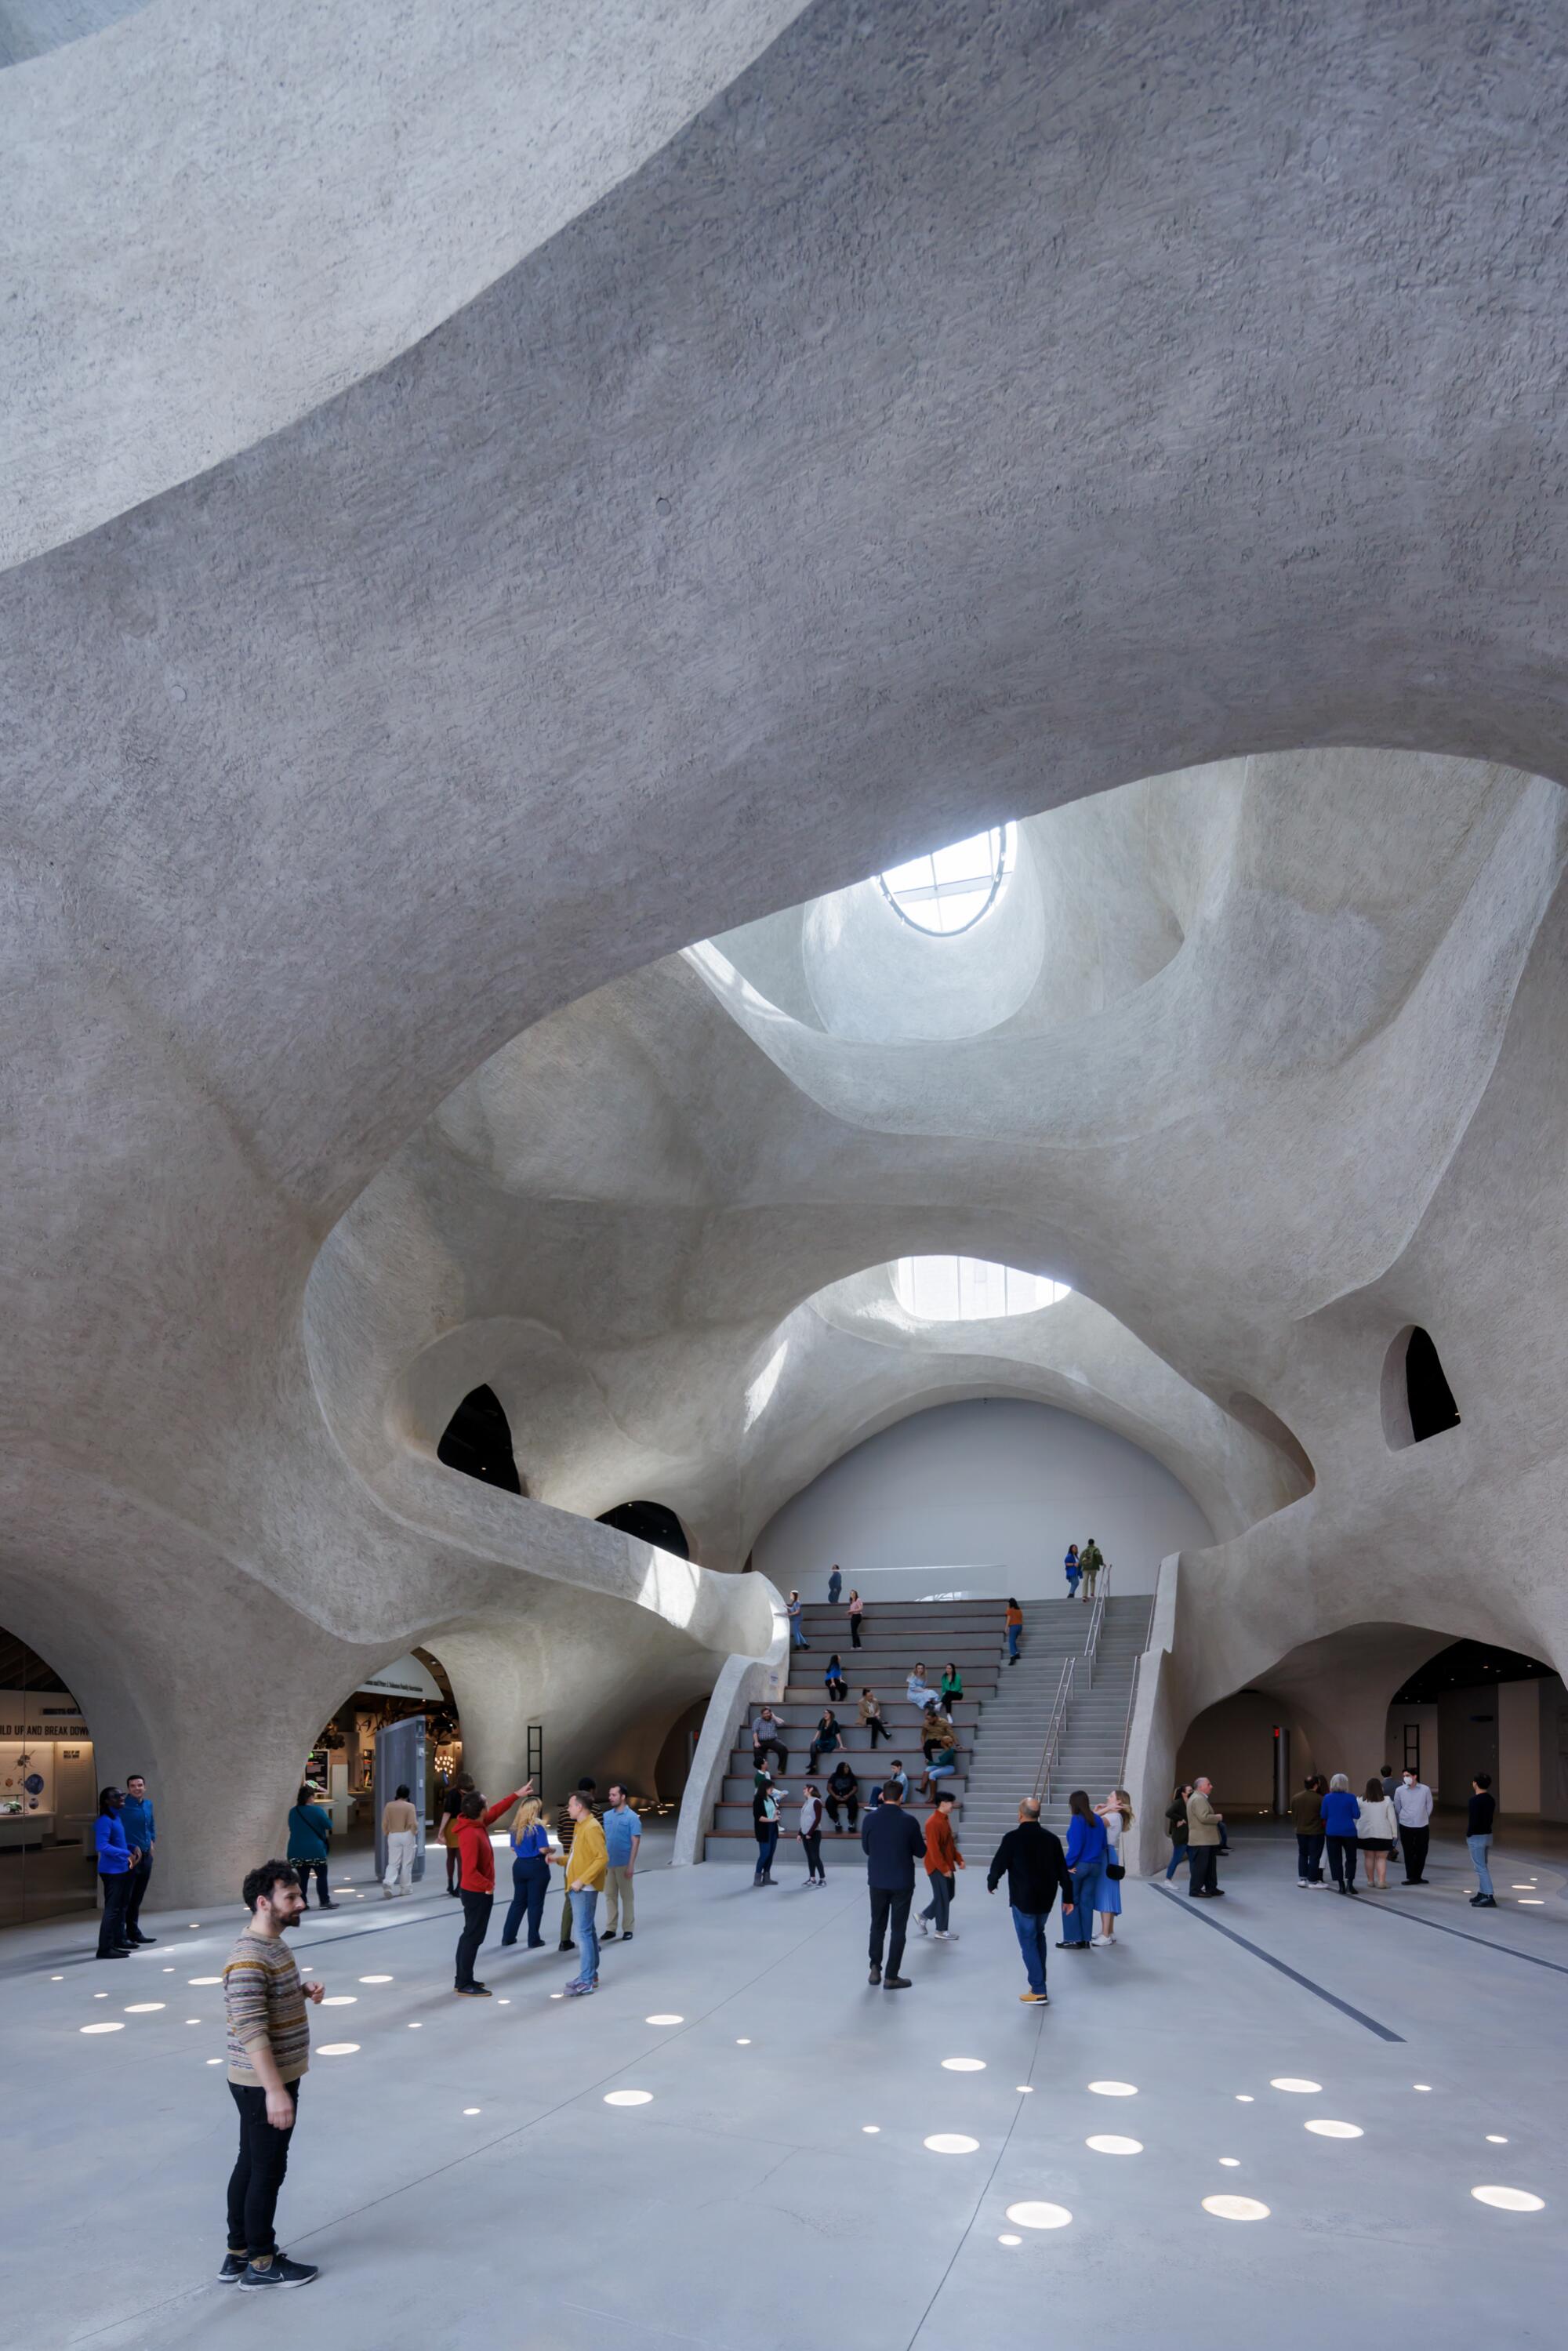 An atrium built to resumble a cave features a stepped seating area where visitors, including many children gather.